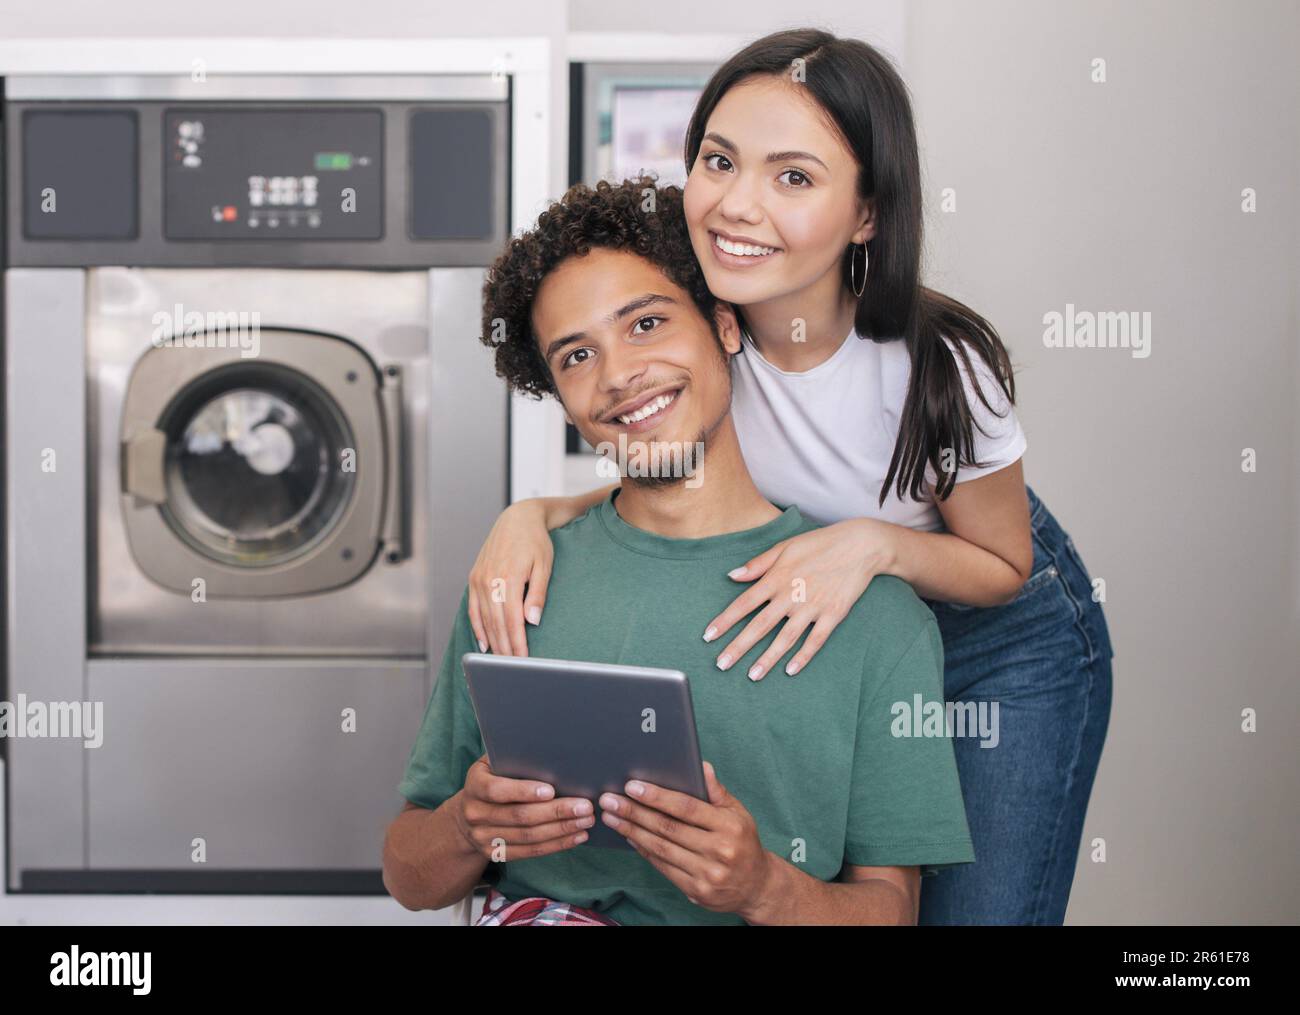 Diverse Couple Posing With Tablet Near Washing Machine At Laundry Stock Photo